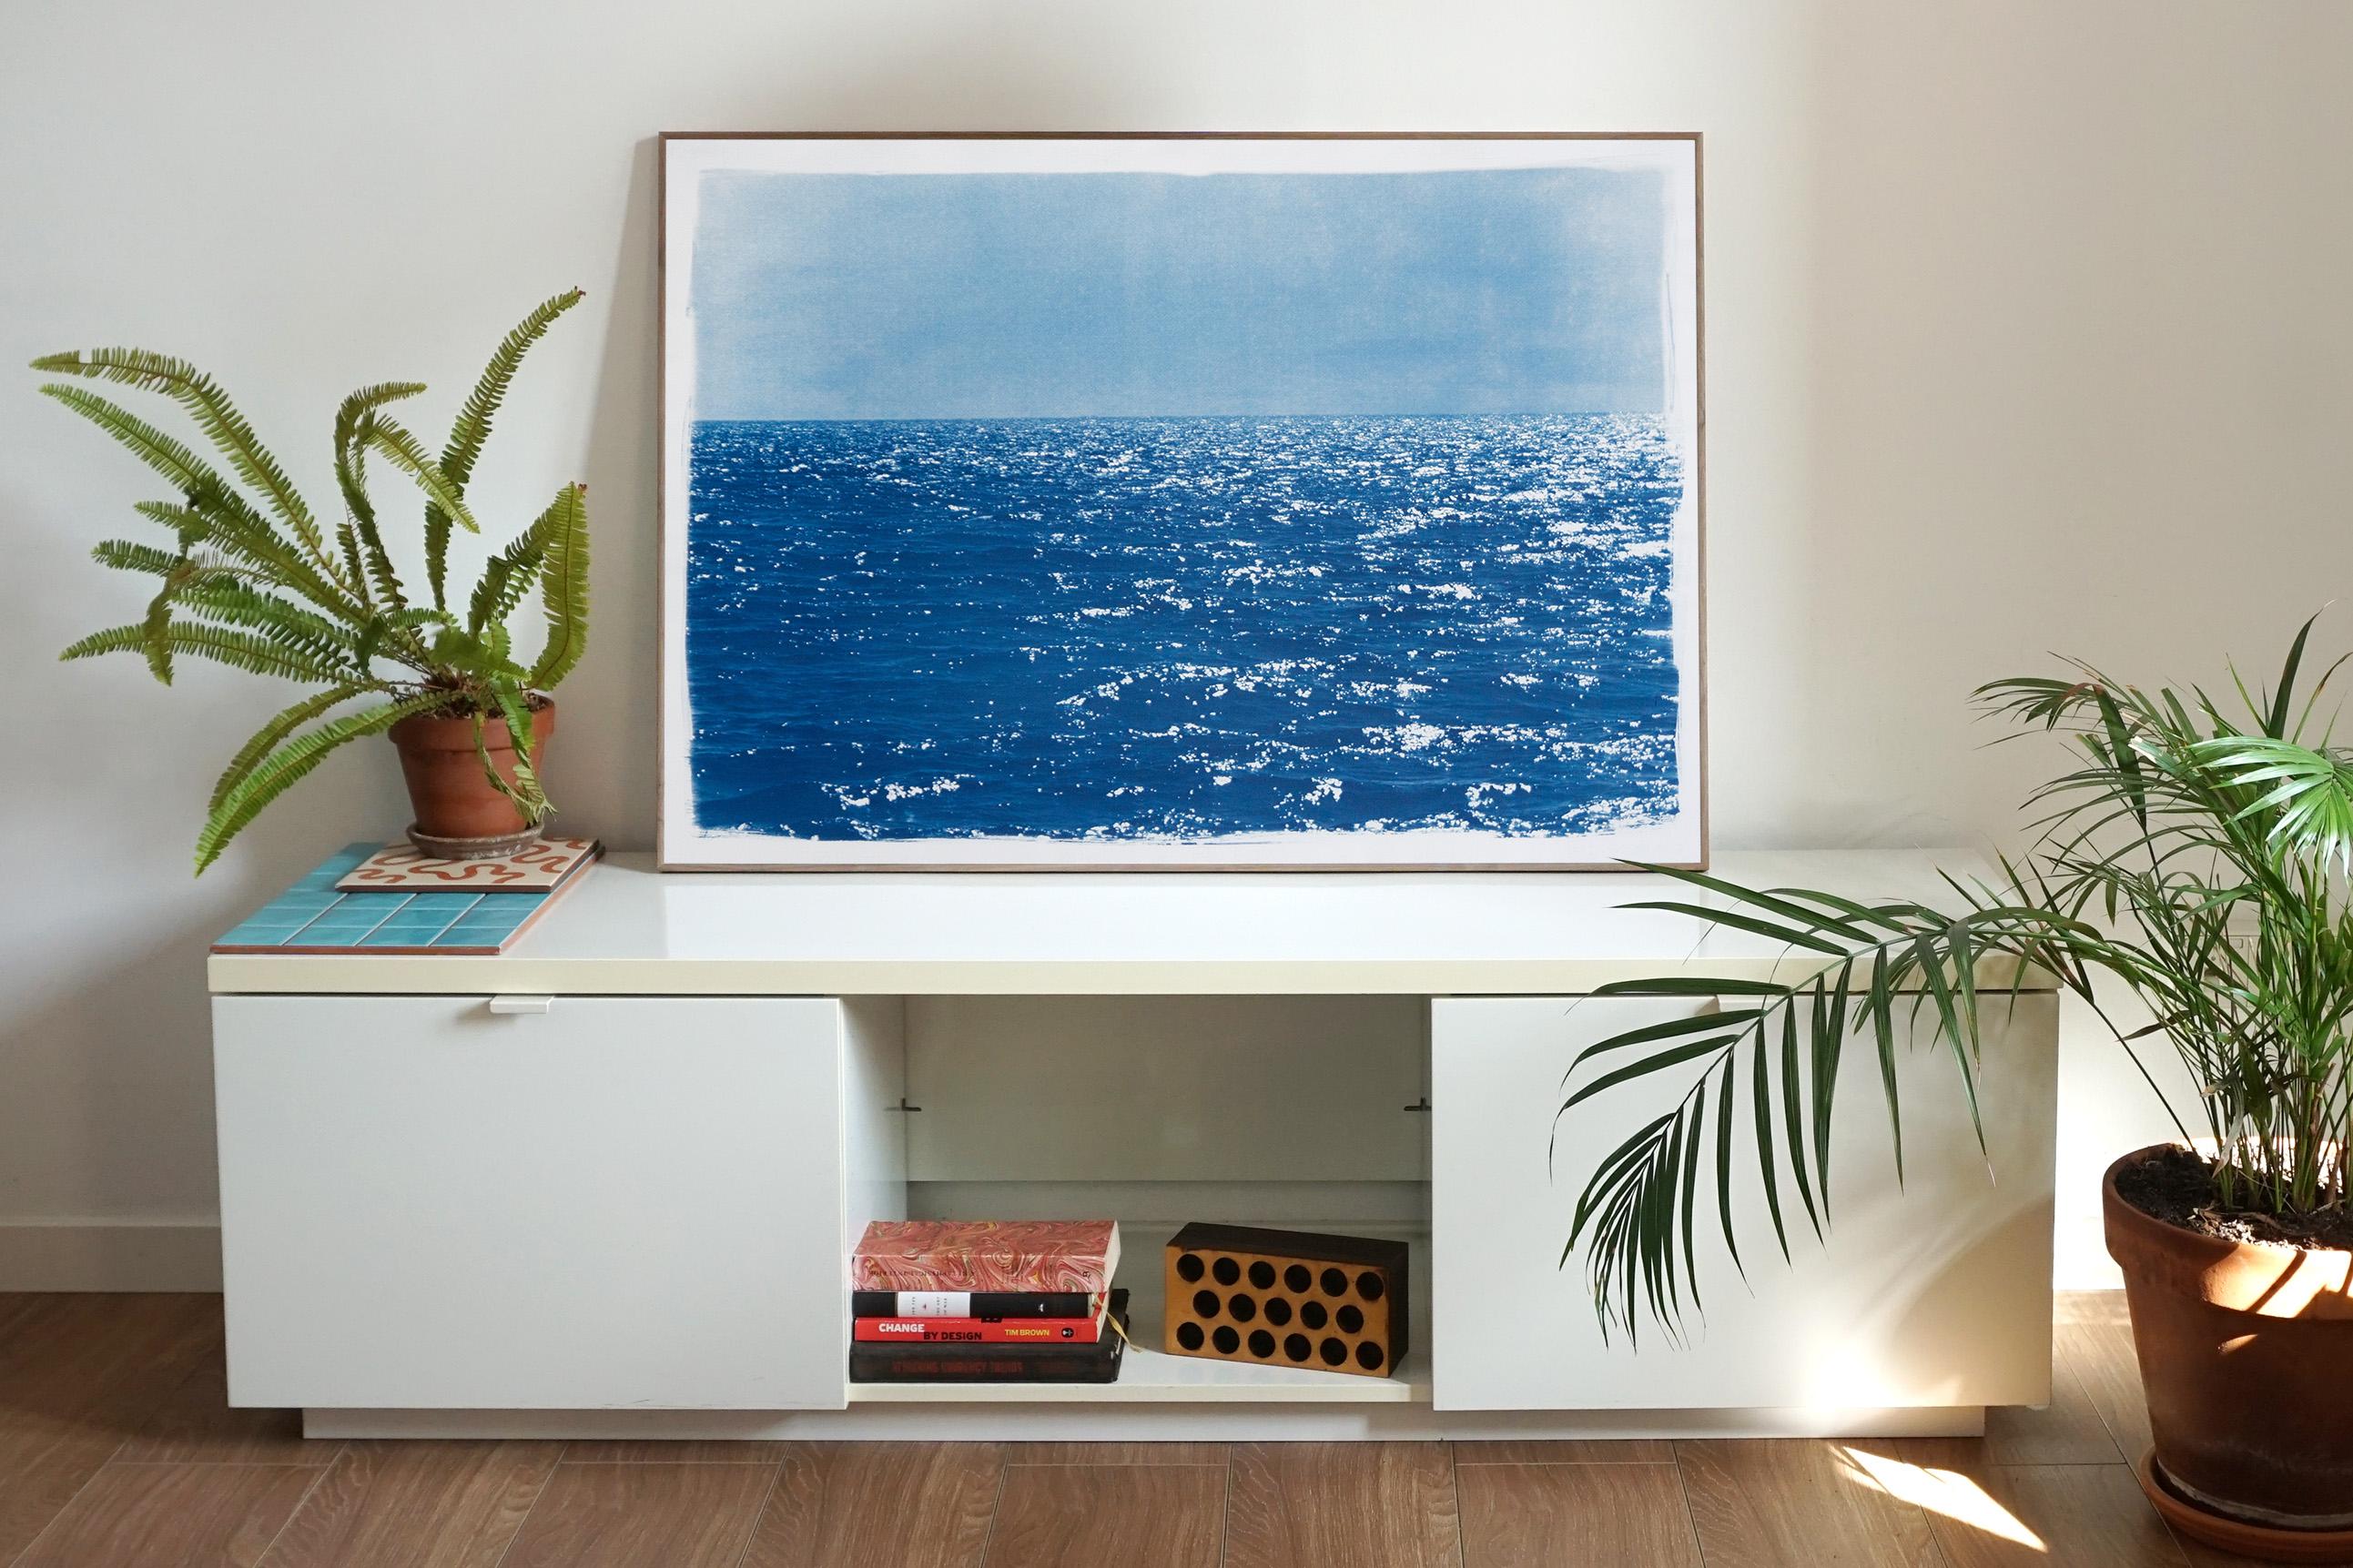 Coastal Blue Cyanotype of Day Time Seascape, Cold Waves, Nautical Painting Shore - Print by Kind of Cyan